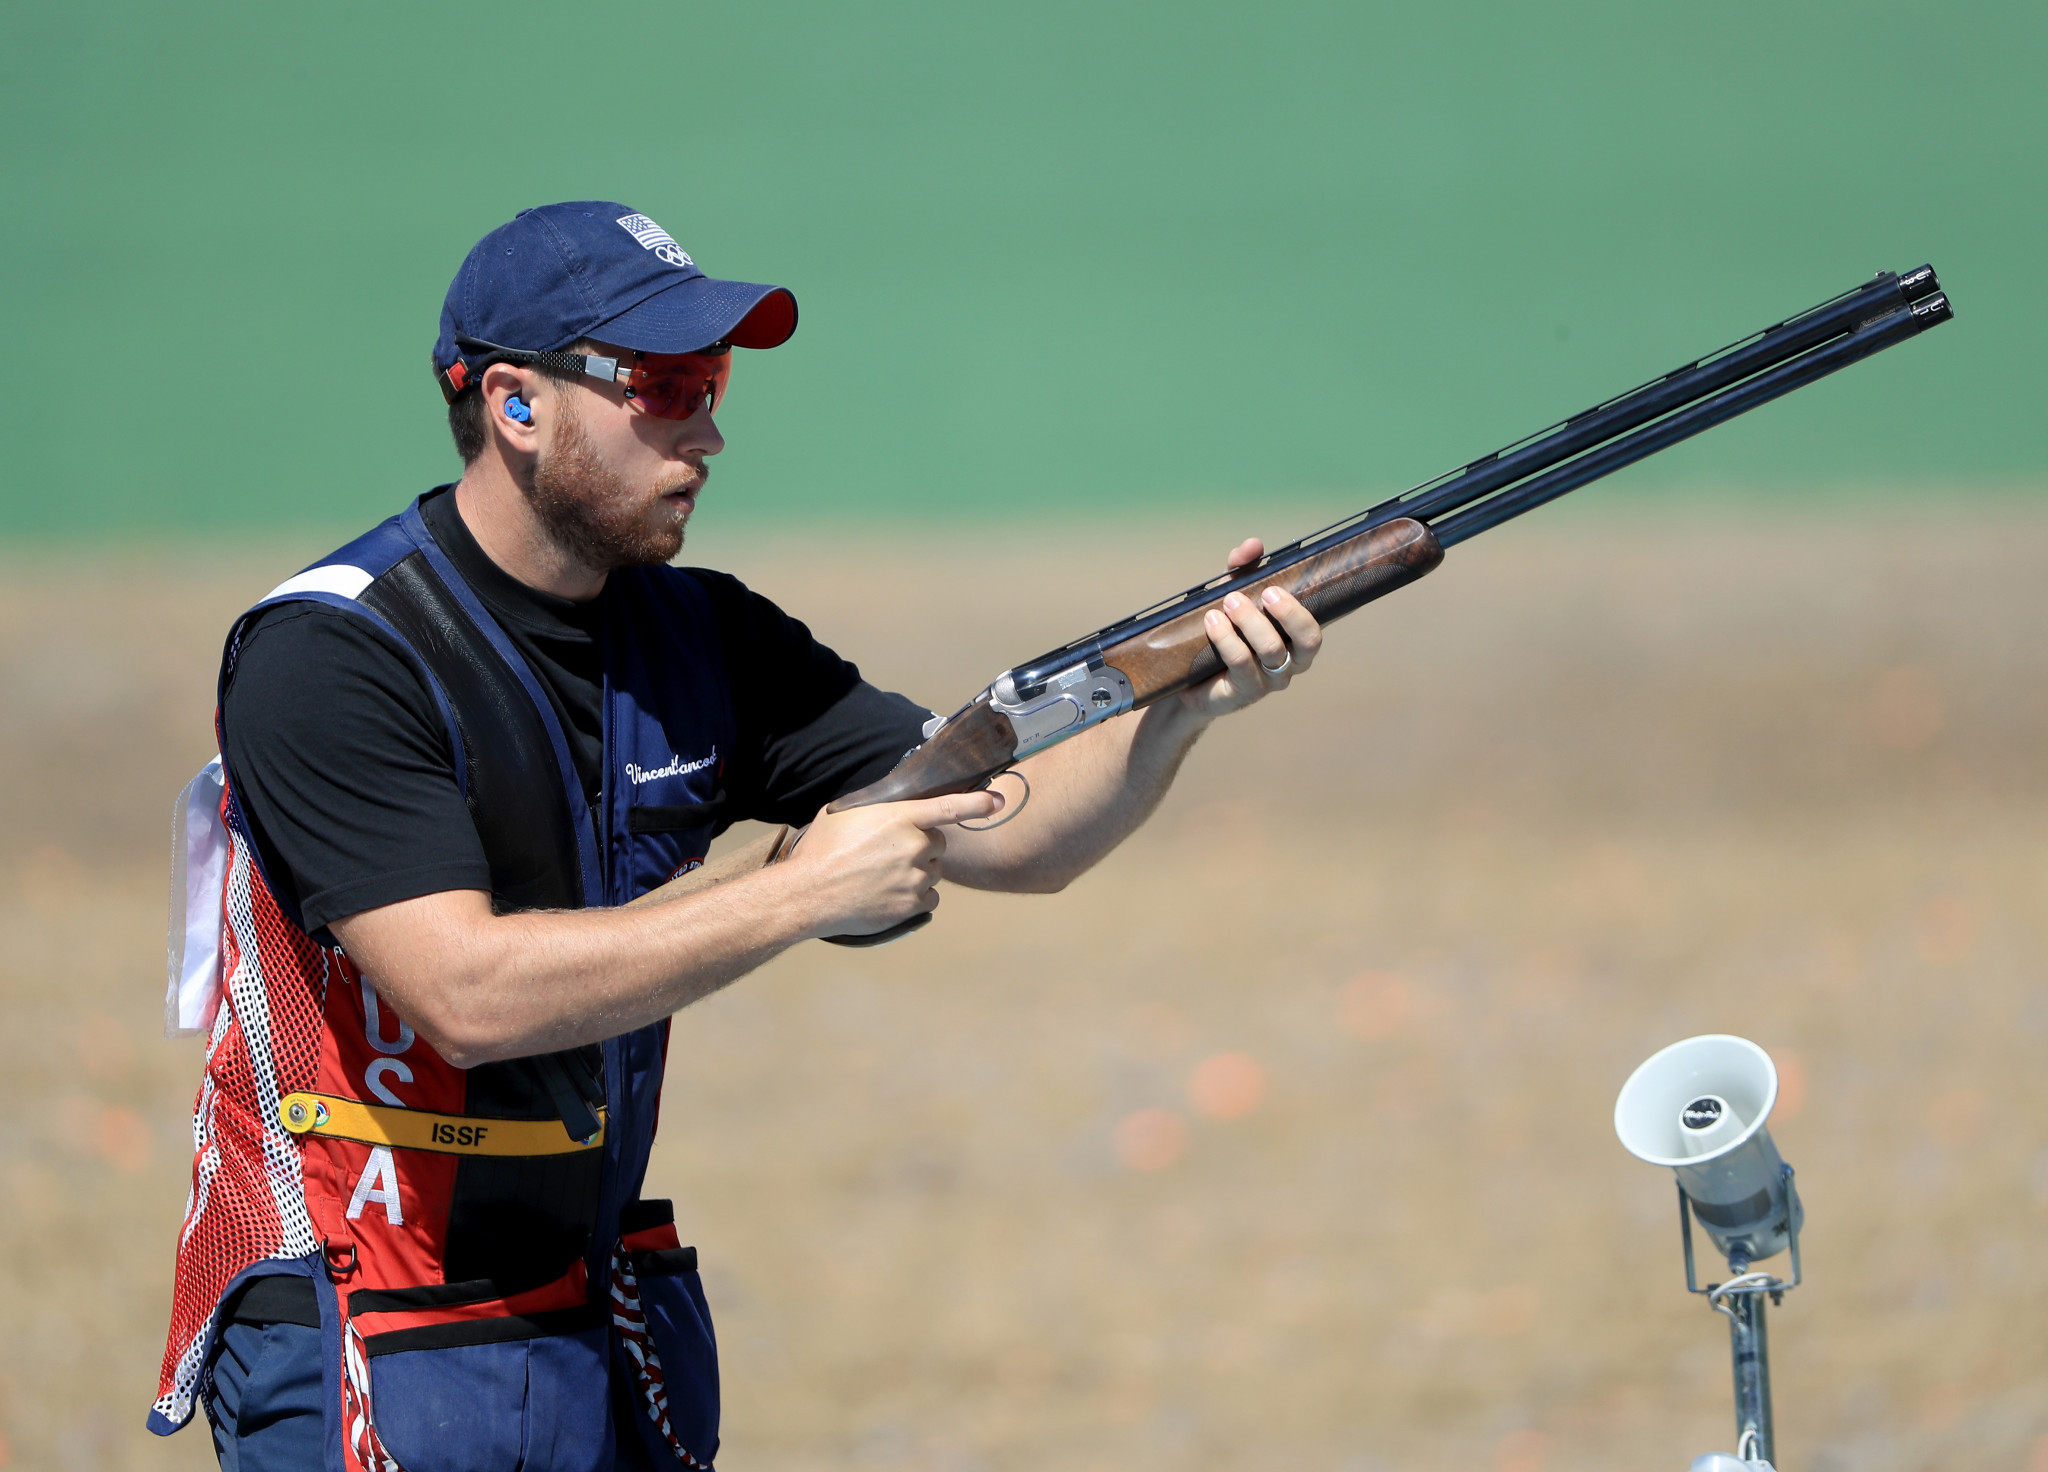 Two-time Olympic gold medalist and reigning world champion Vincent Hancock of the United States will be competing in the ISSF Shotgun World Cup event in Acapulco ©Getty Images